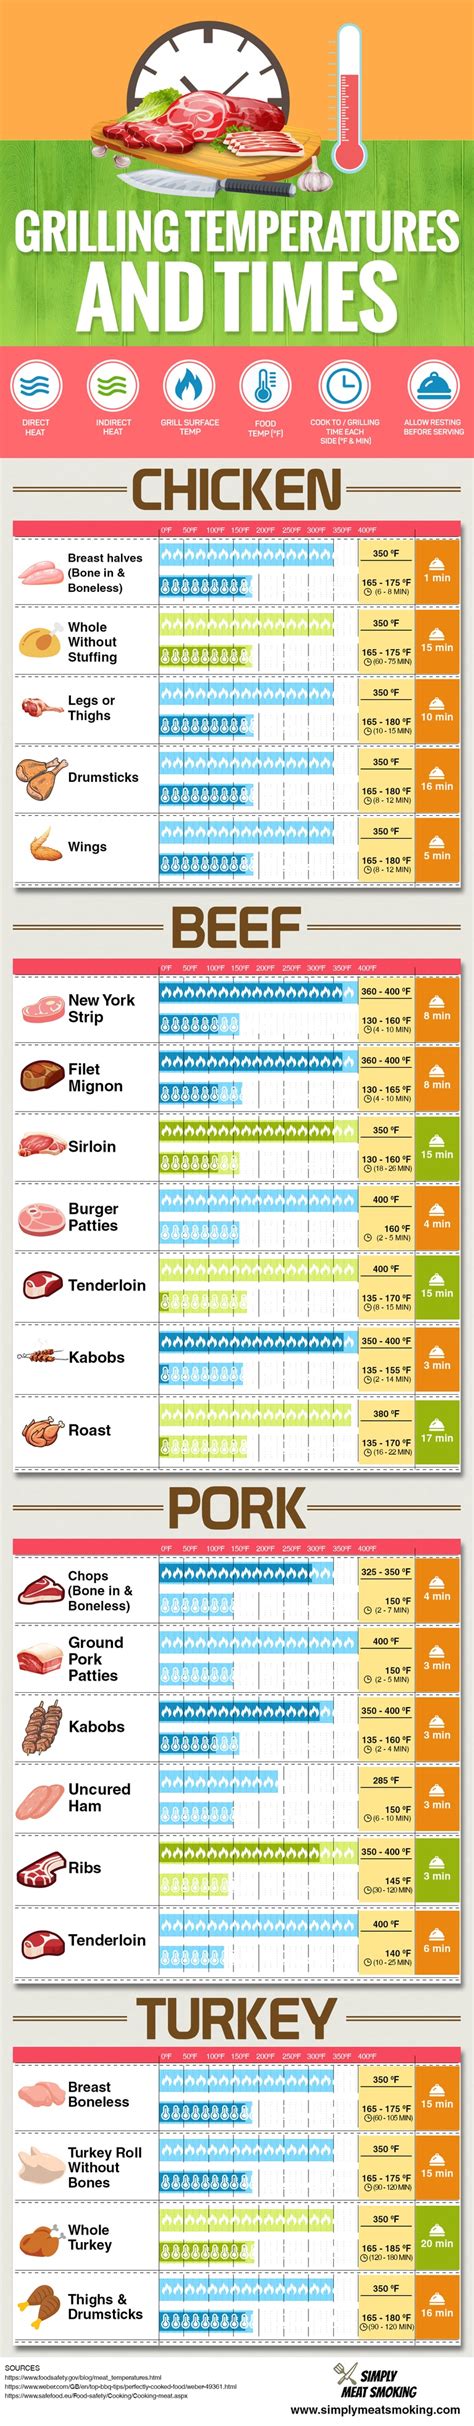 Contents cooking chicken to the correct internal temperature is critical how long does it take to cook chicken? Grill Cooking Time and Temperature Chart: Perfect Your ...